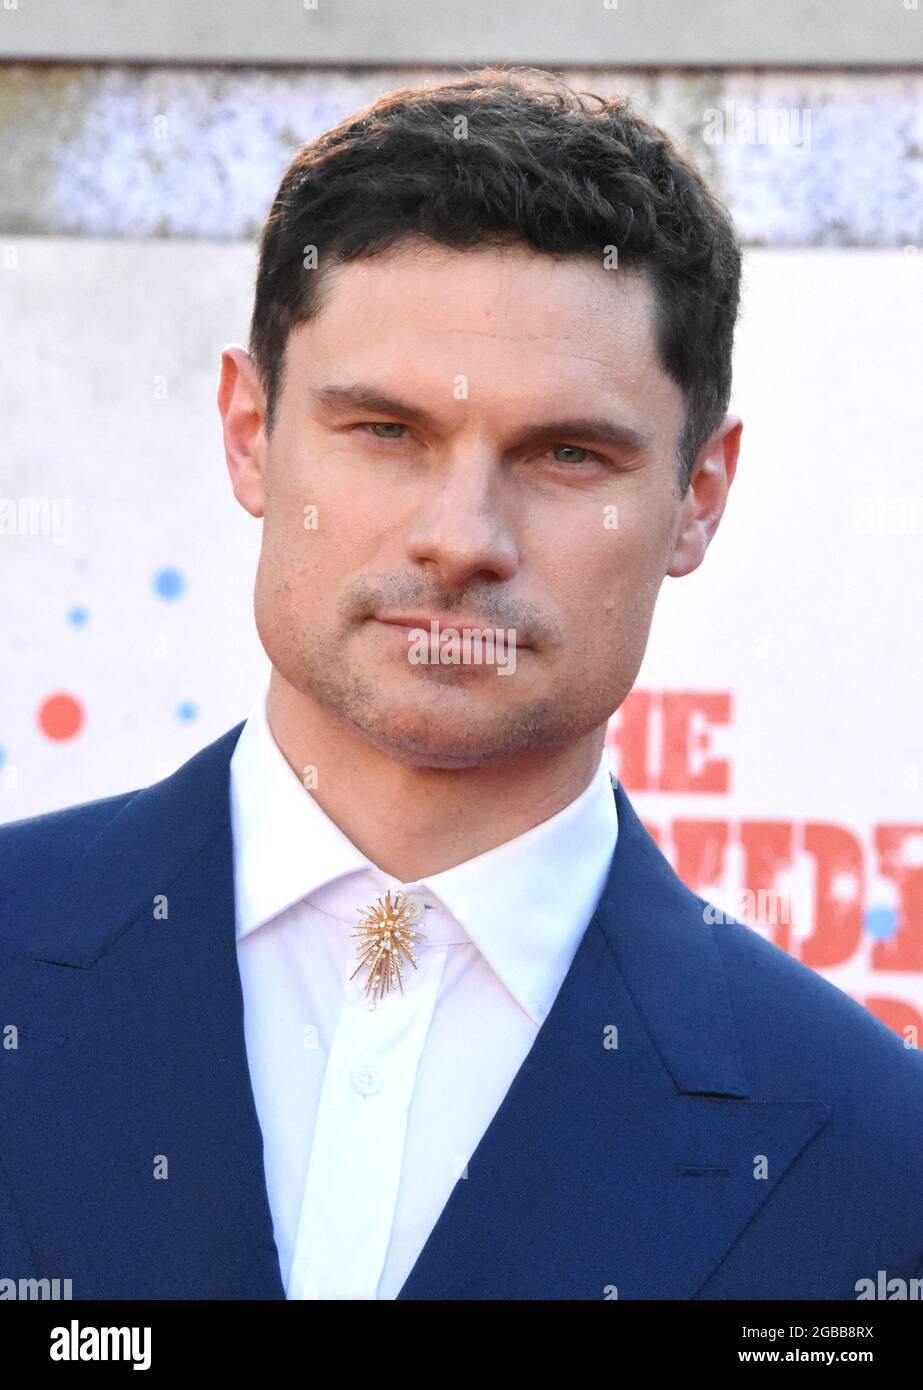 Los Angeles, California, USA 2nd August 2021 Actor Flula Borg attends Warner Bros. Premiere of 'The Suicide Squad' at Regency Village Theatre on August 2, 2021 in Los Angeles, California, USA. Photo by Barry King/Alamy Live News Stock Photo